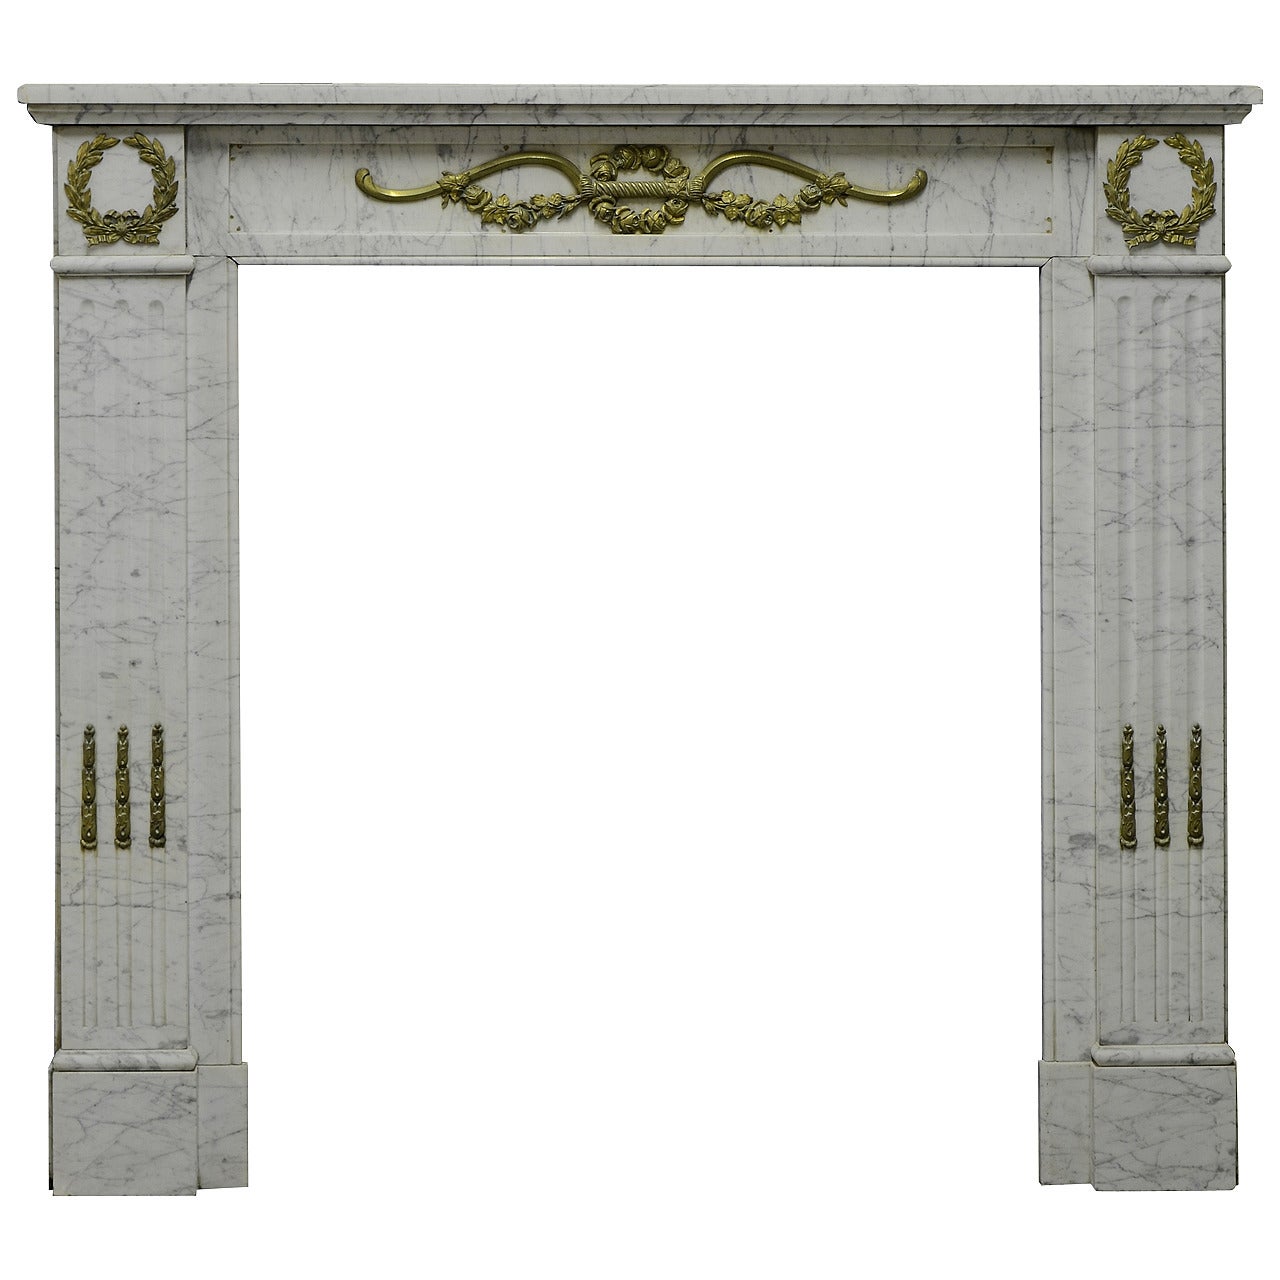 19th Century White Marble and Brass Louis XVI Fireplace Mantel